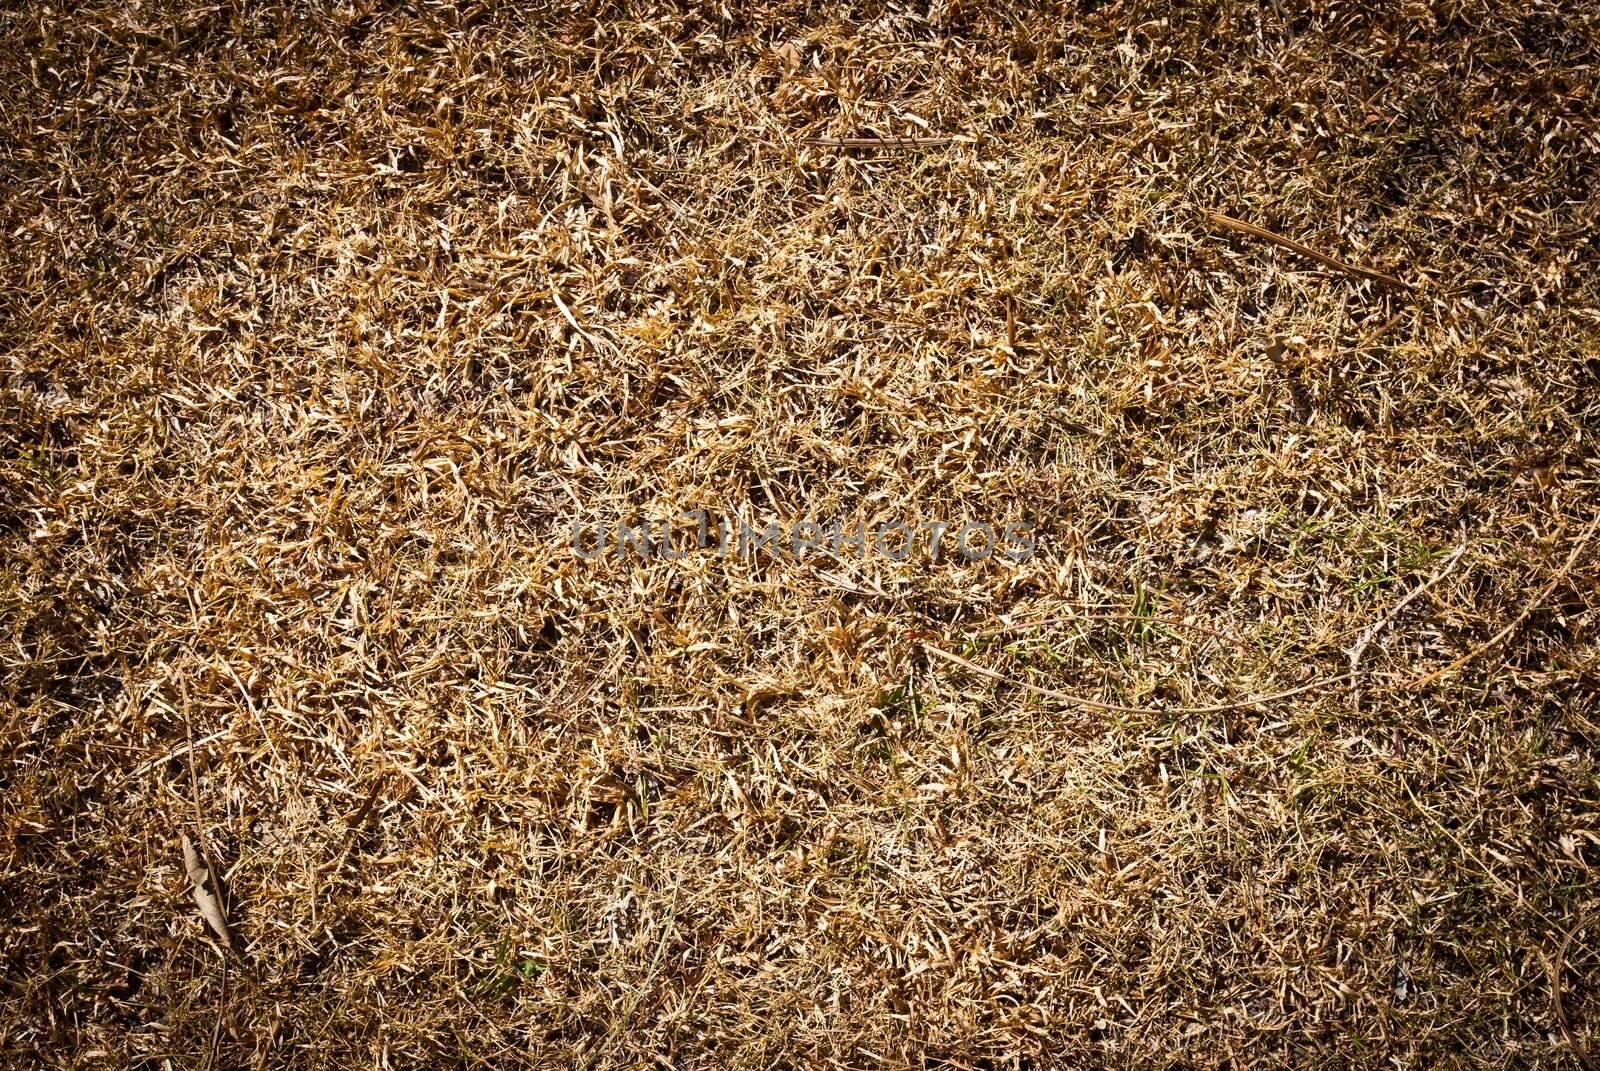 Very dry grass taken from top view by sasilsolutions